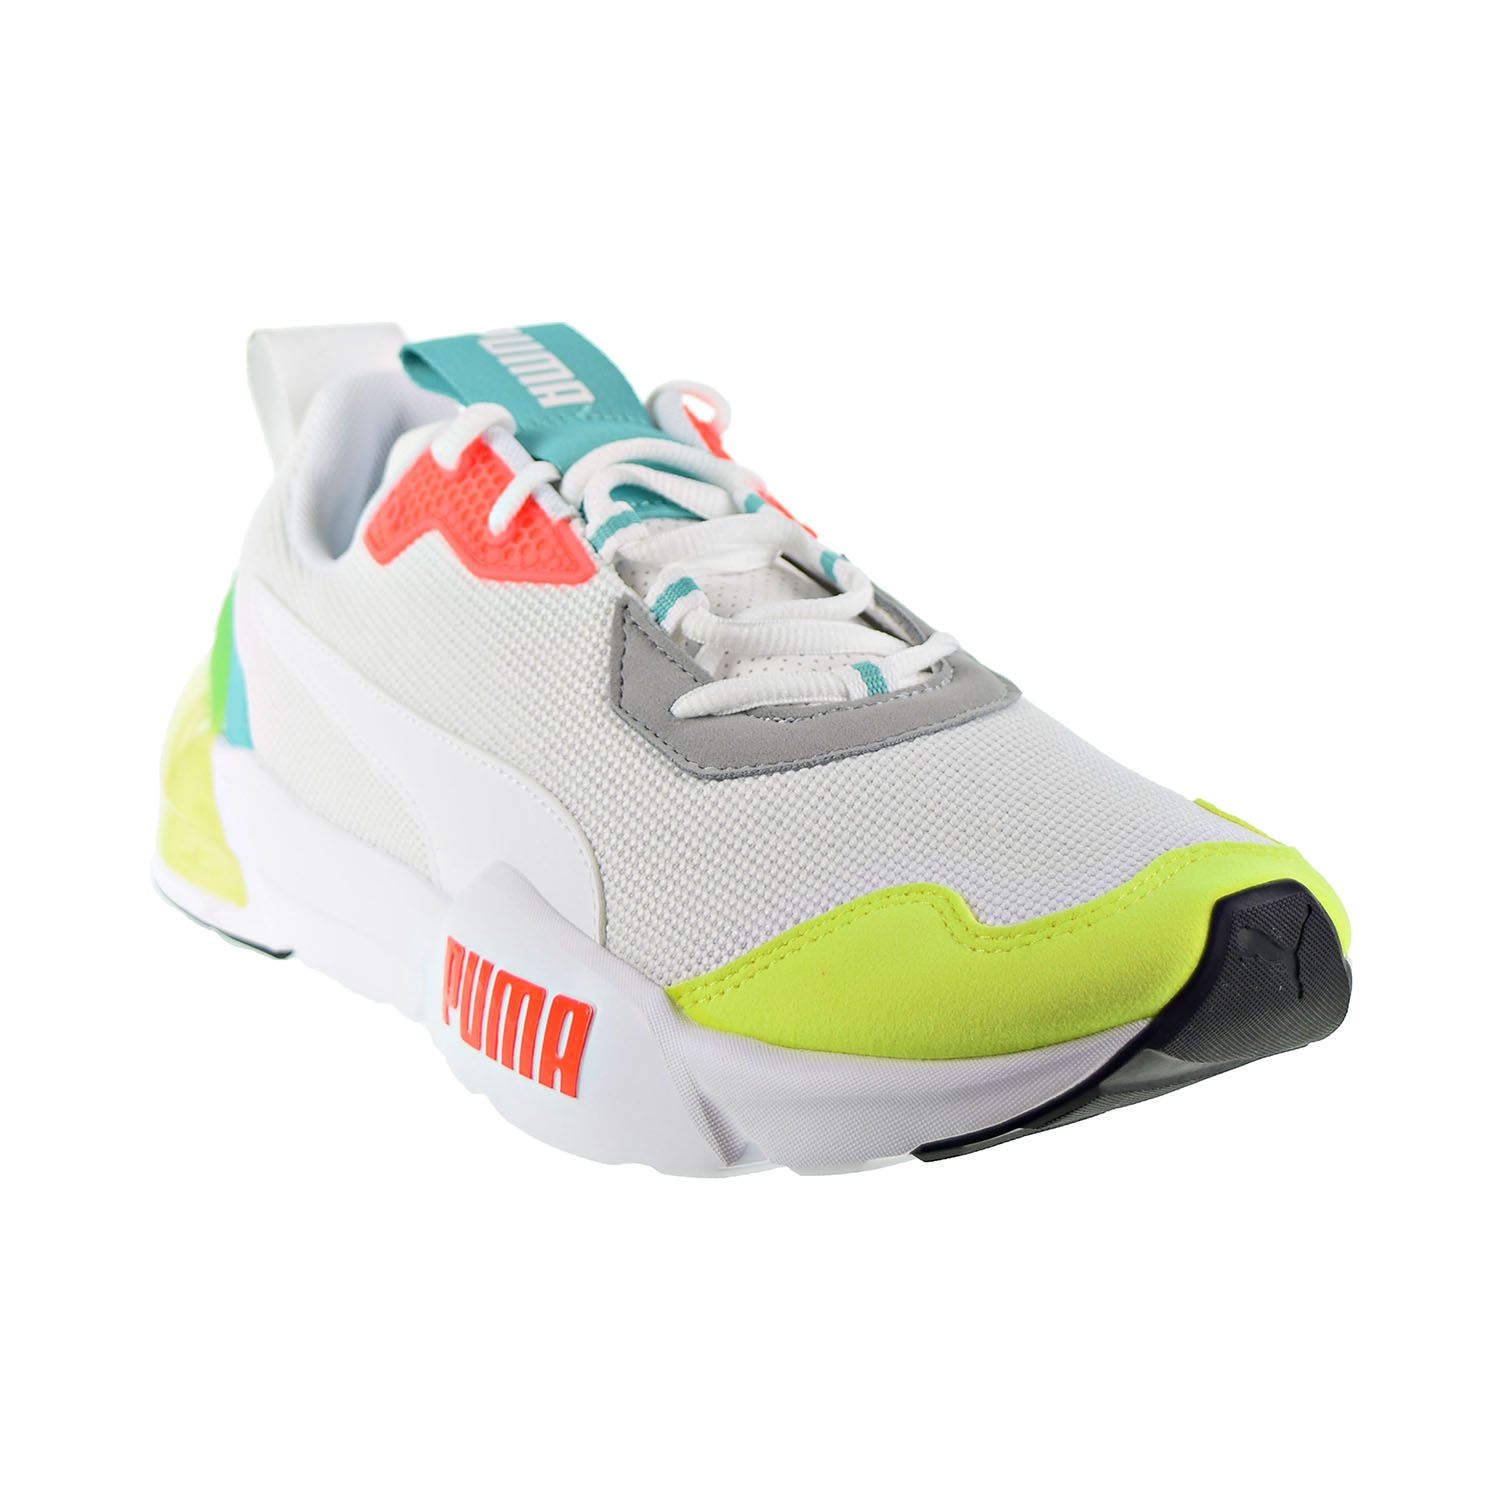 Puma Cell Phanton Men's Shoes White/Turquoise/Red 192939-04 - image 2 of 6